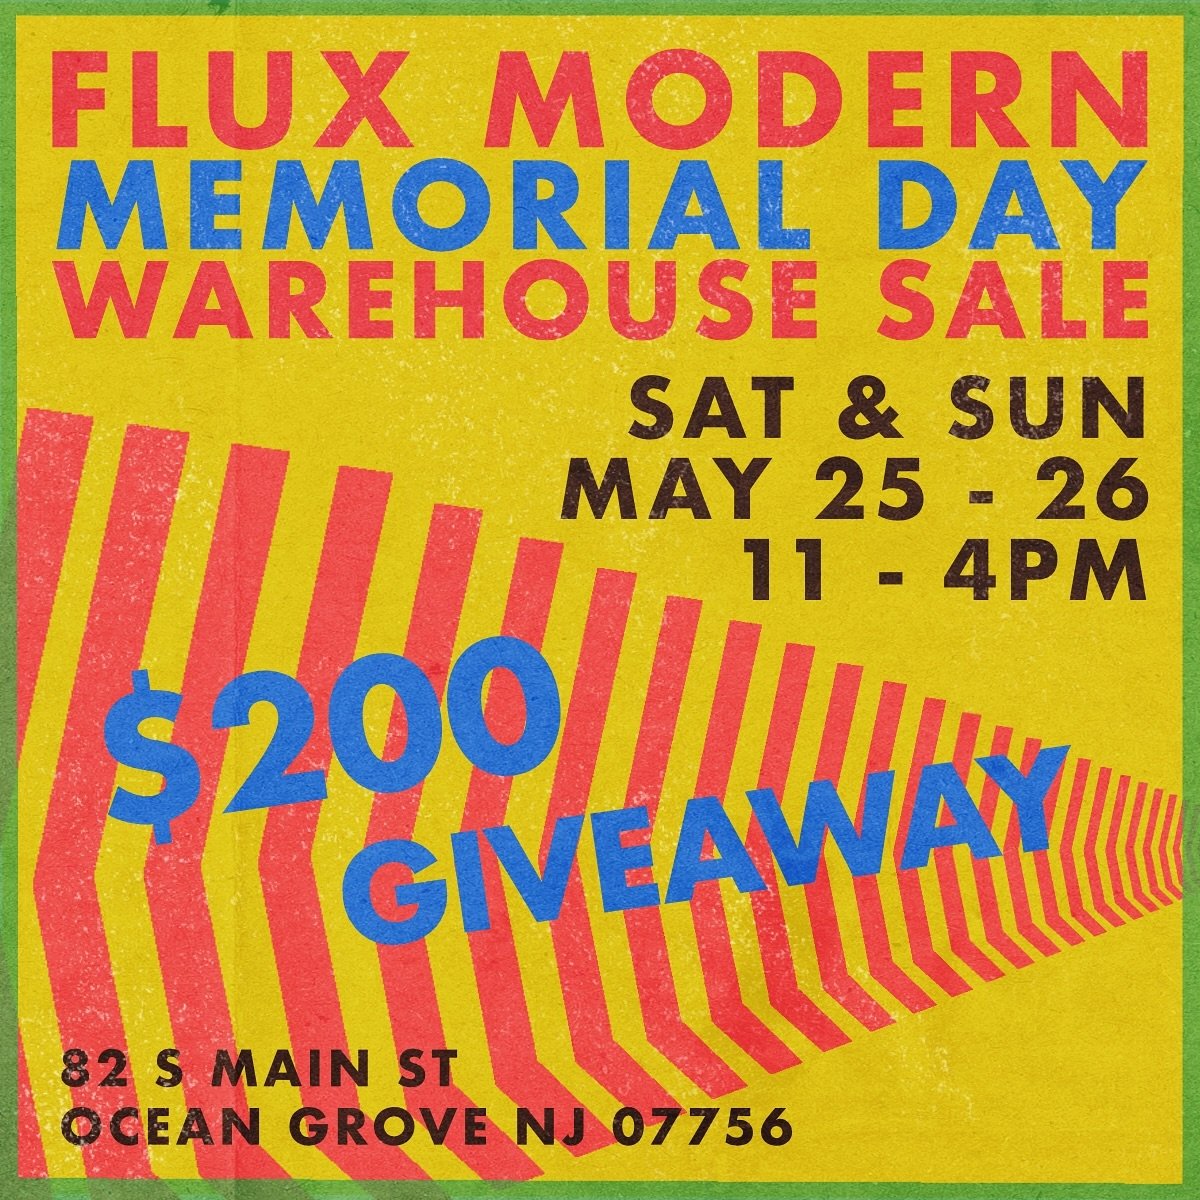 You asked, we listened!

🗣️FLUX MODERN MEMORIAL WEEKEND WAREHOUSE SALE!🗣️

And to help spread the word, we&rsquo;re doing a $200 giveaway!

$200 GIVEAWAY:
-like this post
-Tag a friend in the comments for ONE ENTRY
-Enter as many times as you&rsquo